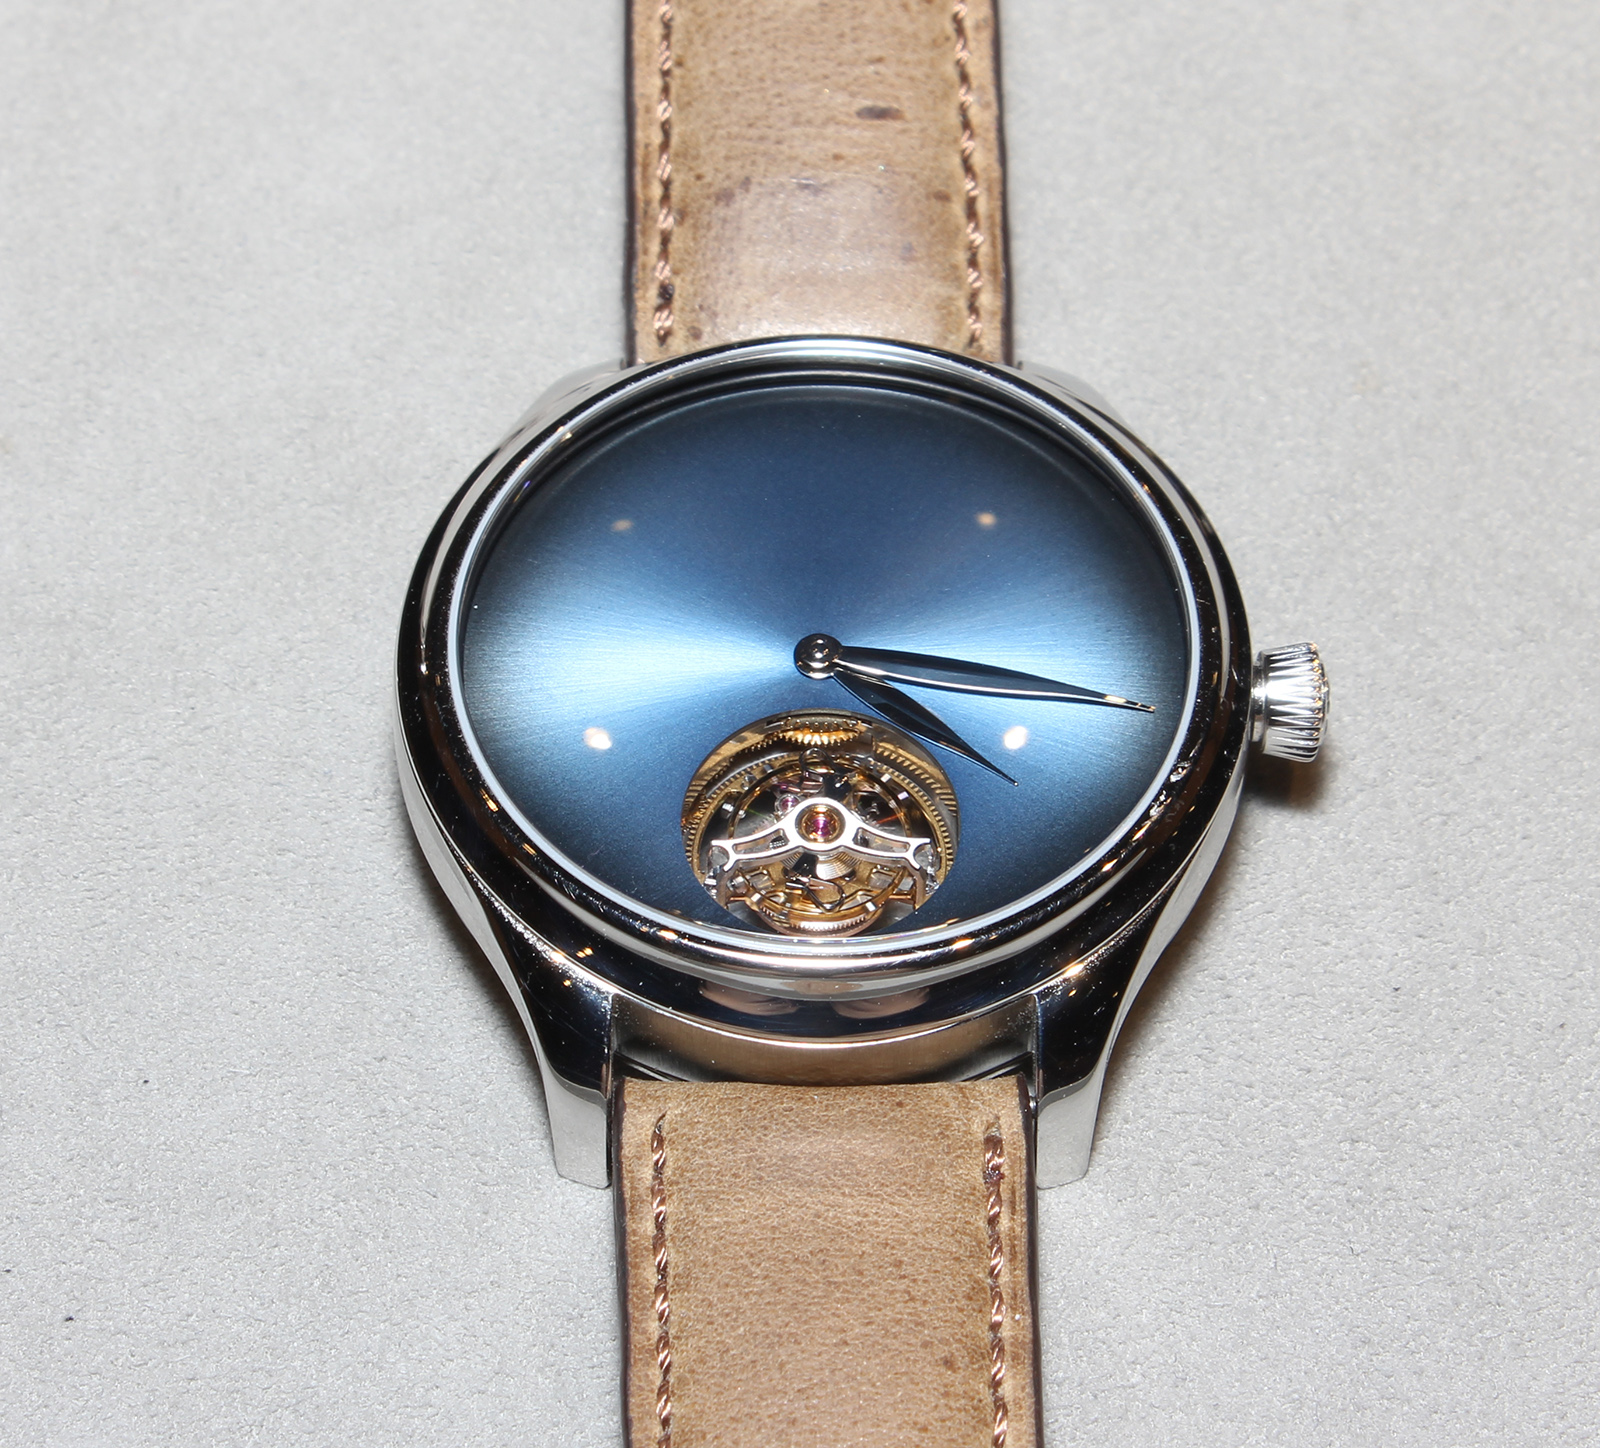 Tiger's Eye and Cool watches from H. Moser & Cie.